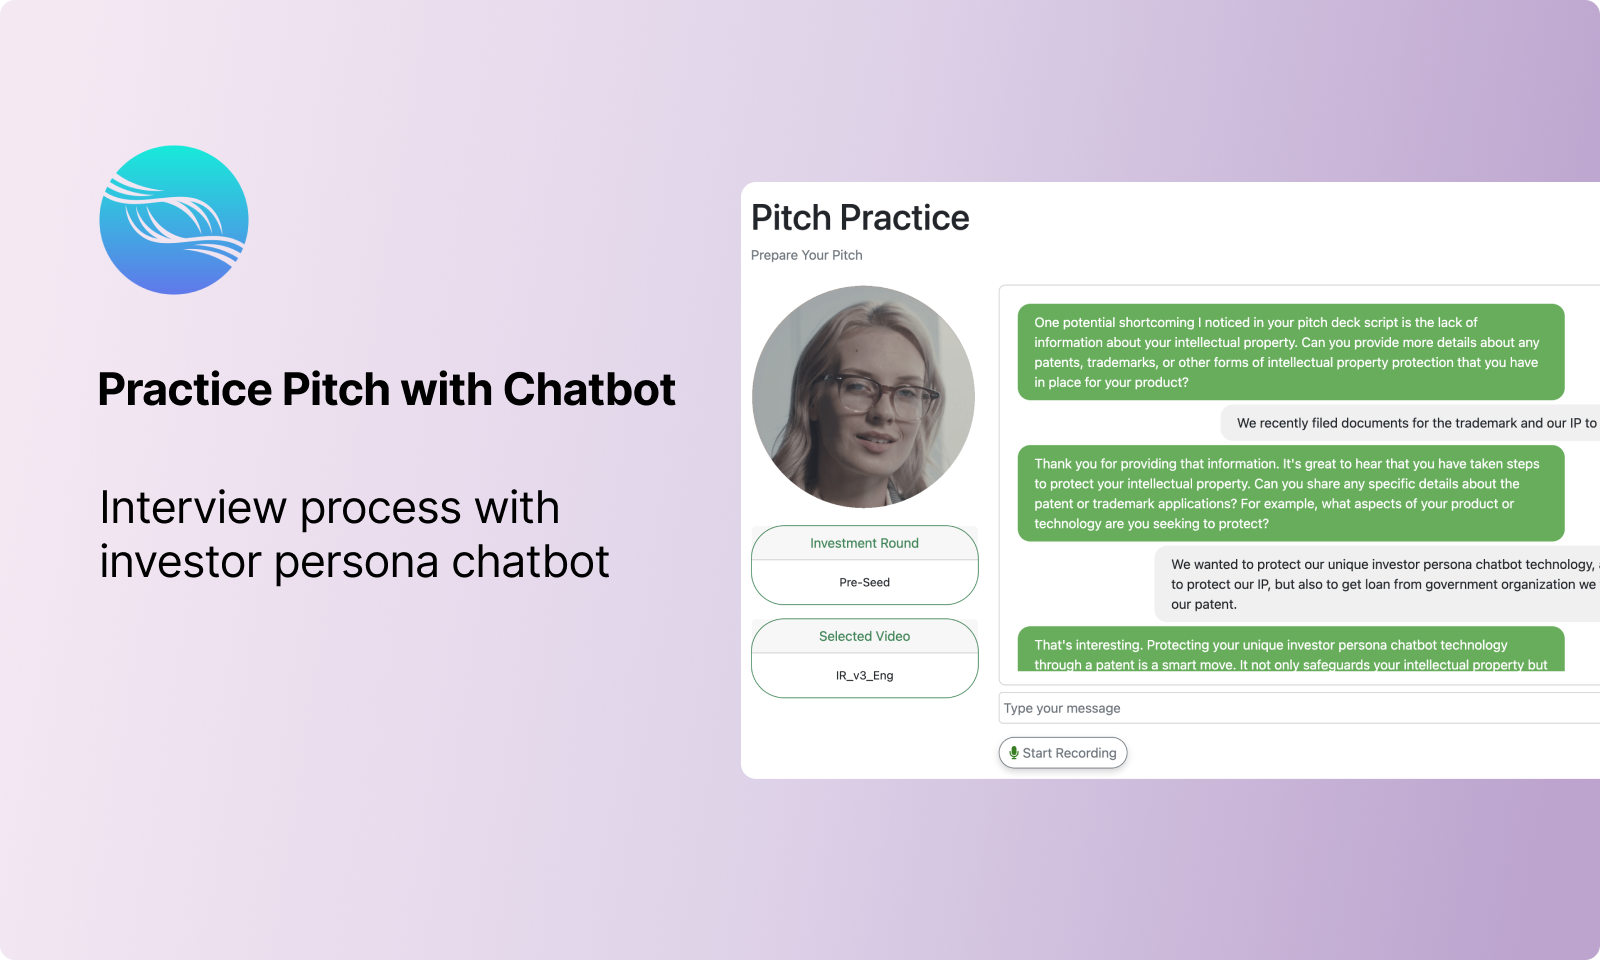 AI investor persona chatbot for pitch practice in Intelliwebi